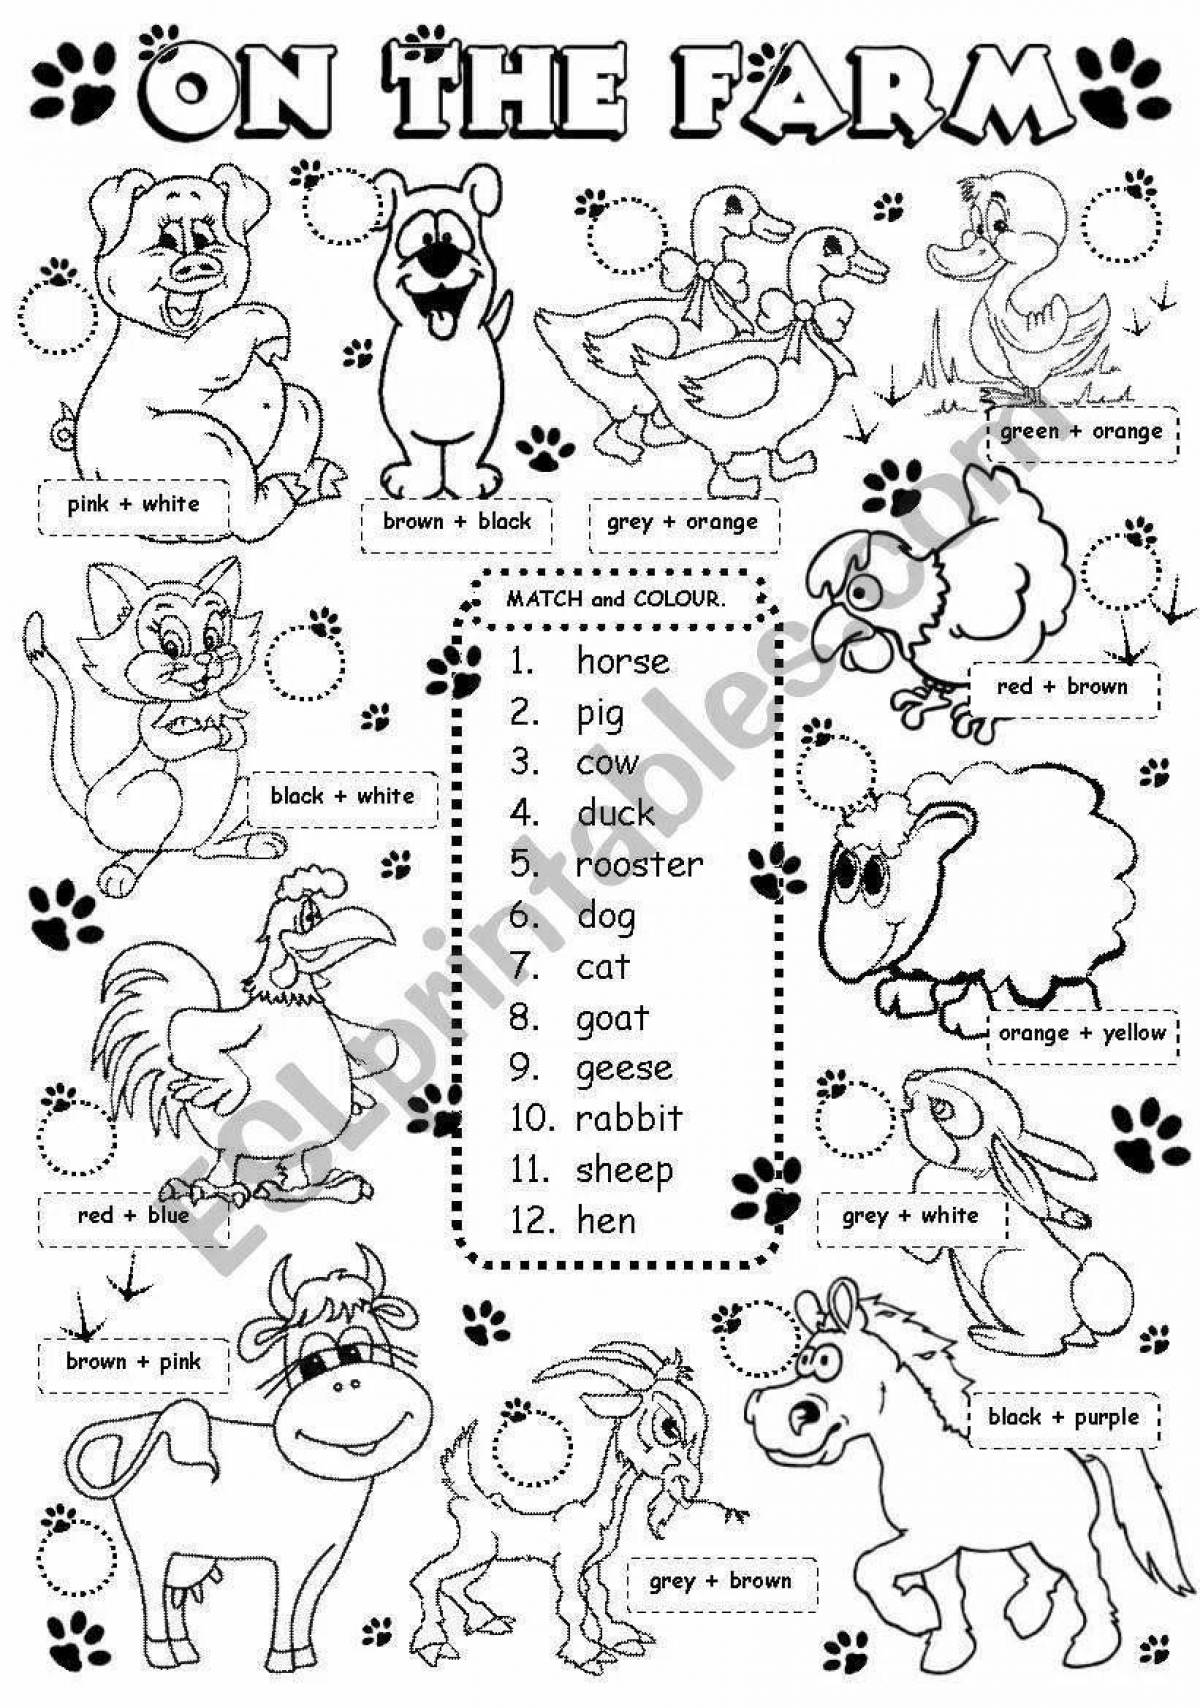 Color frenzy 4th grade english coloring book